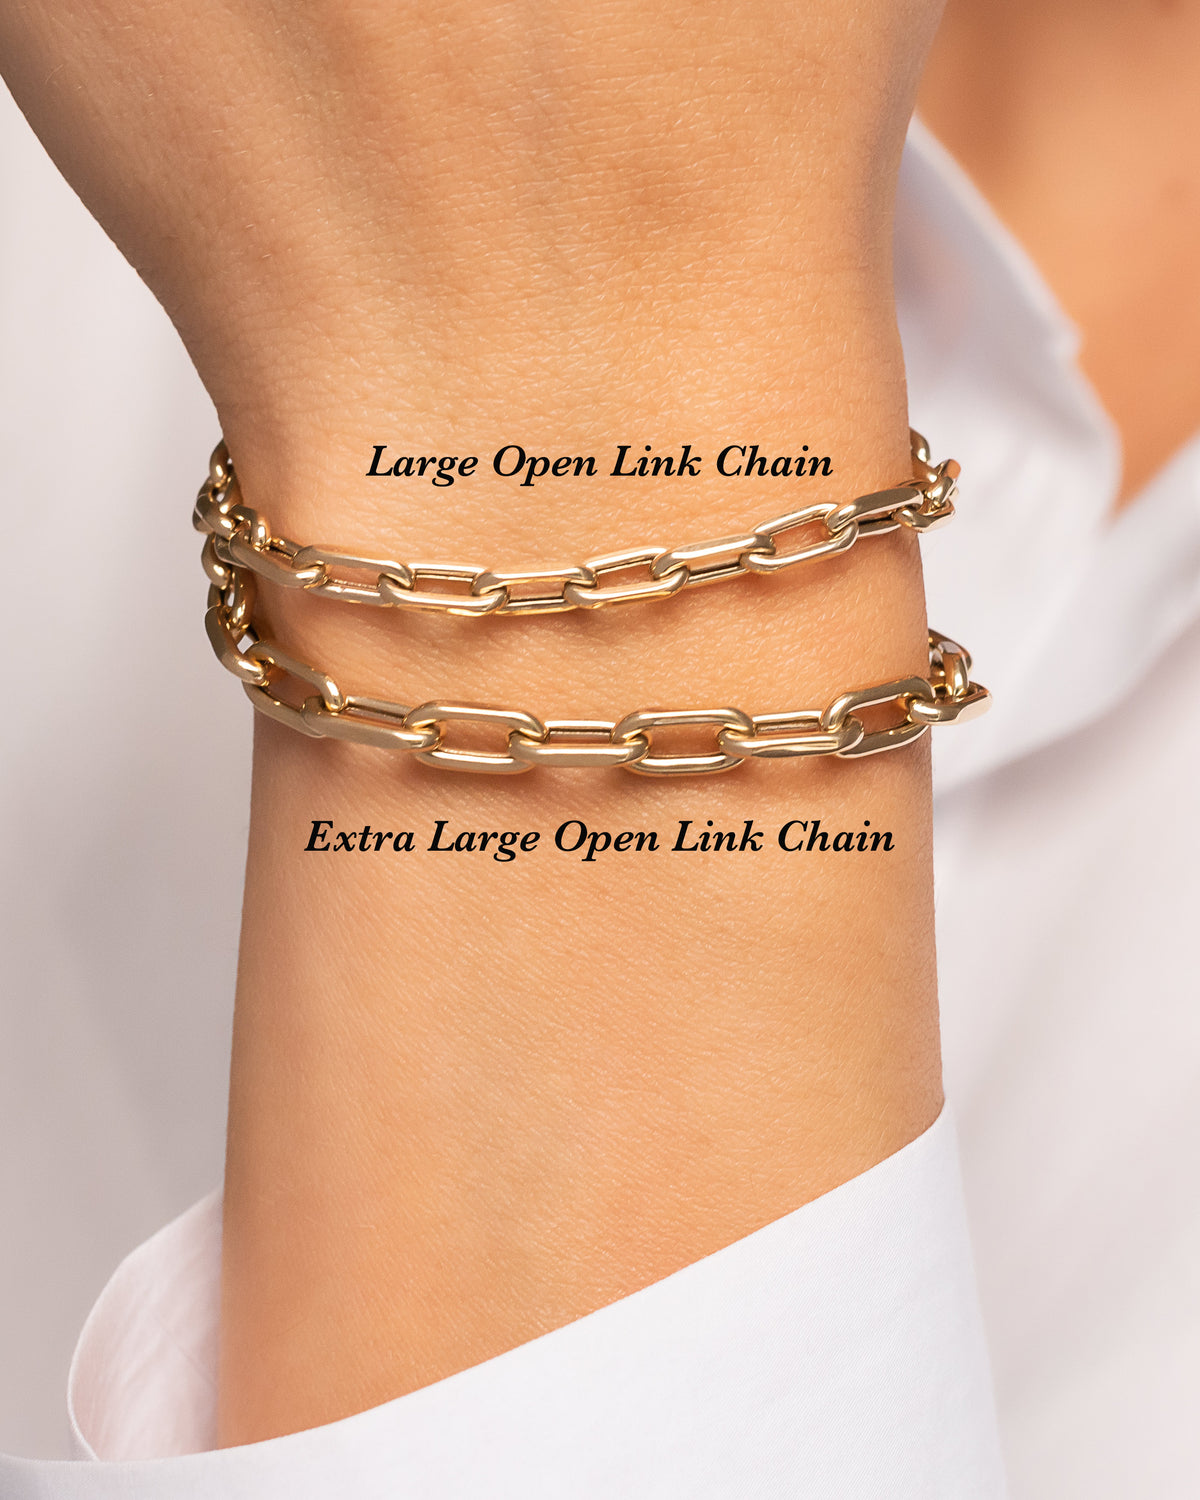 14k Gold Large Open Link Chain Bracelet in Yellow Gold 